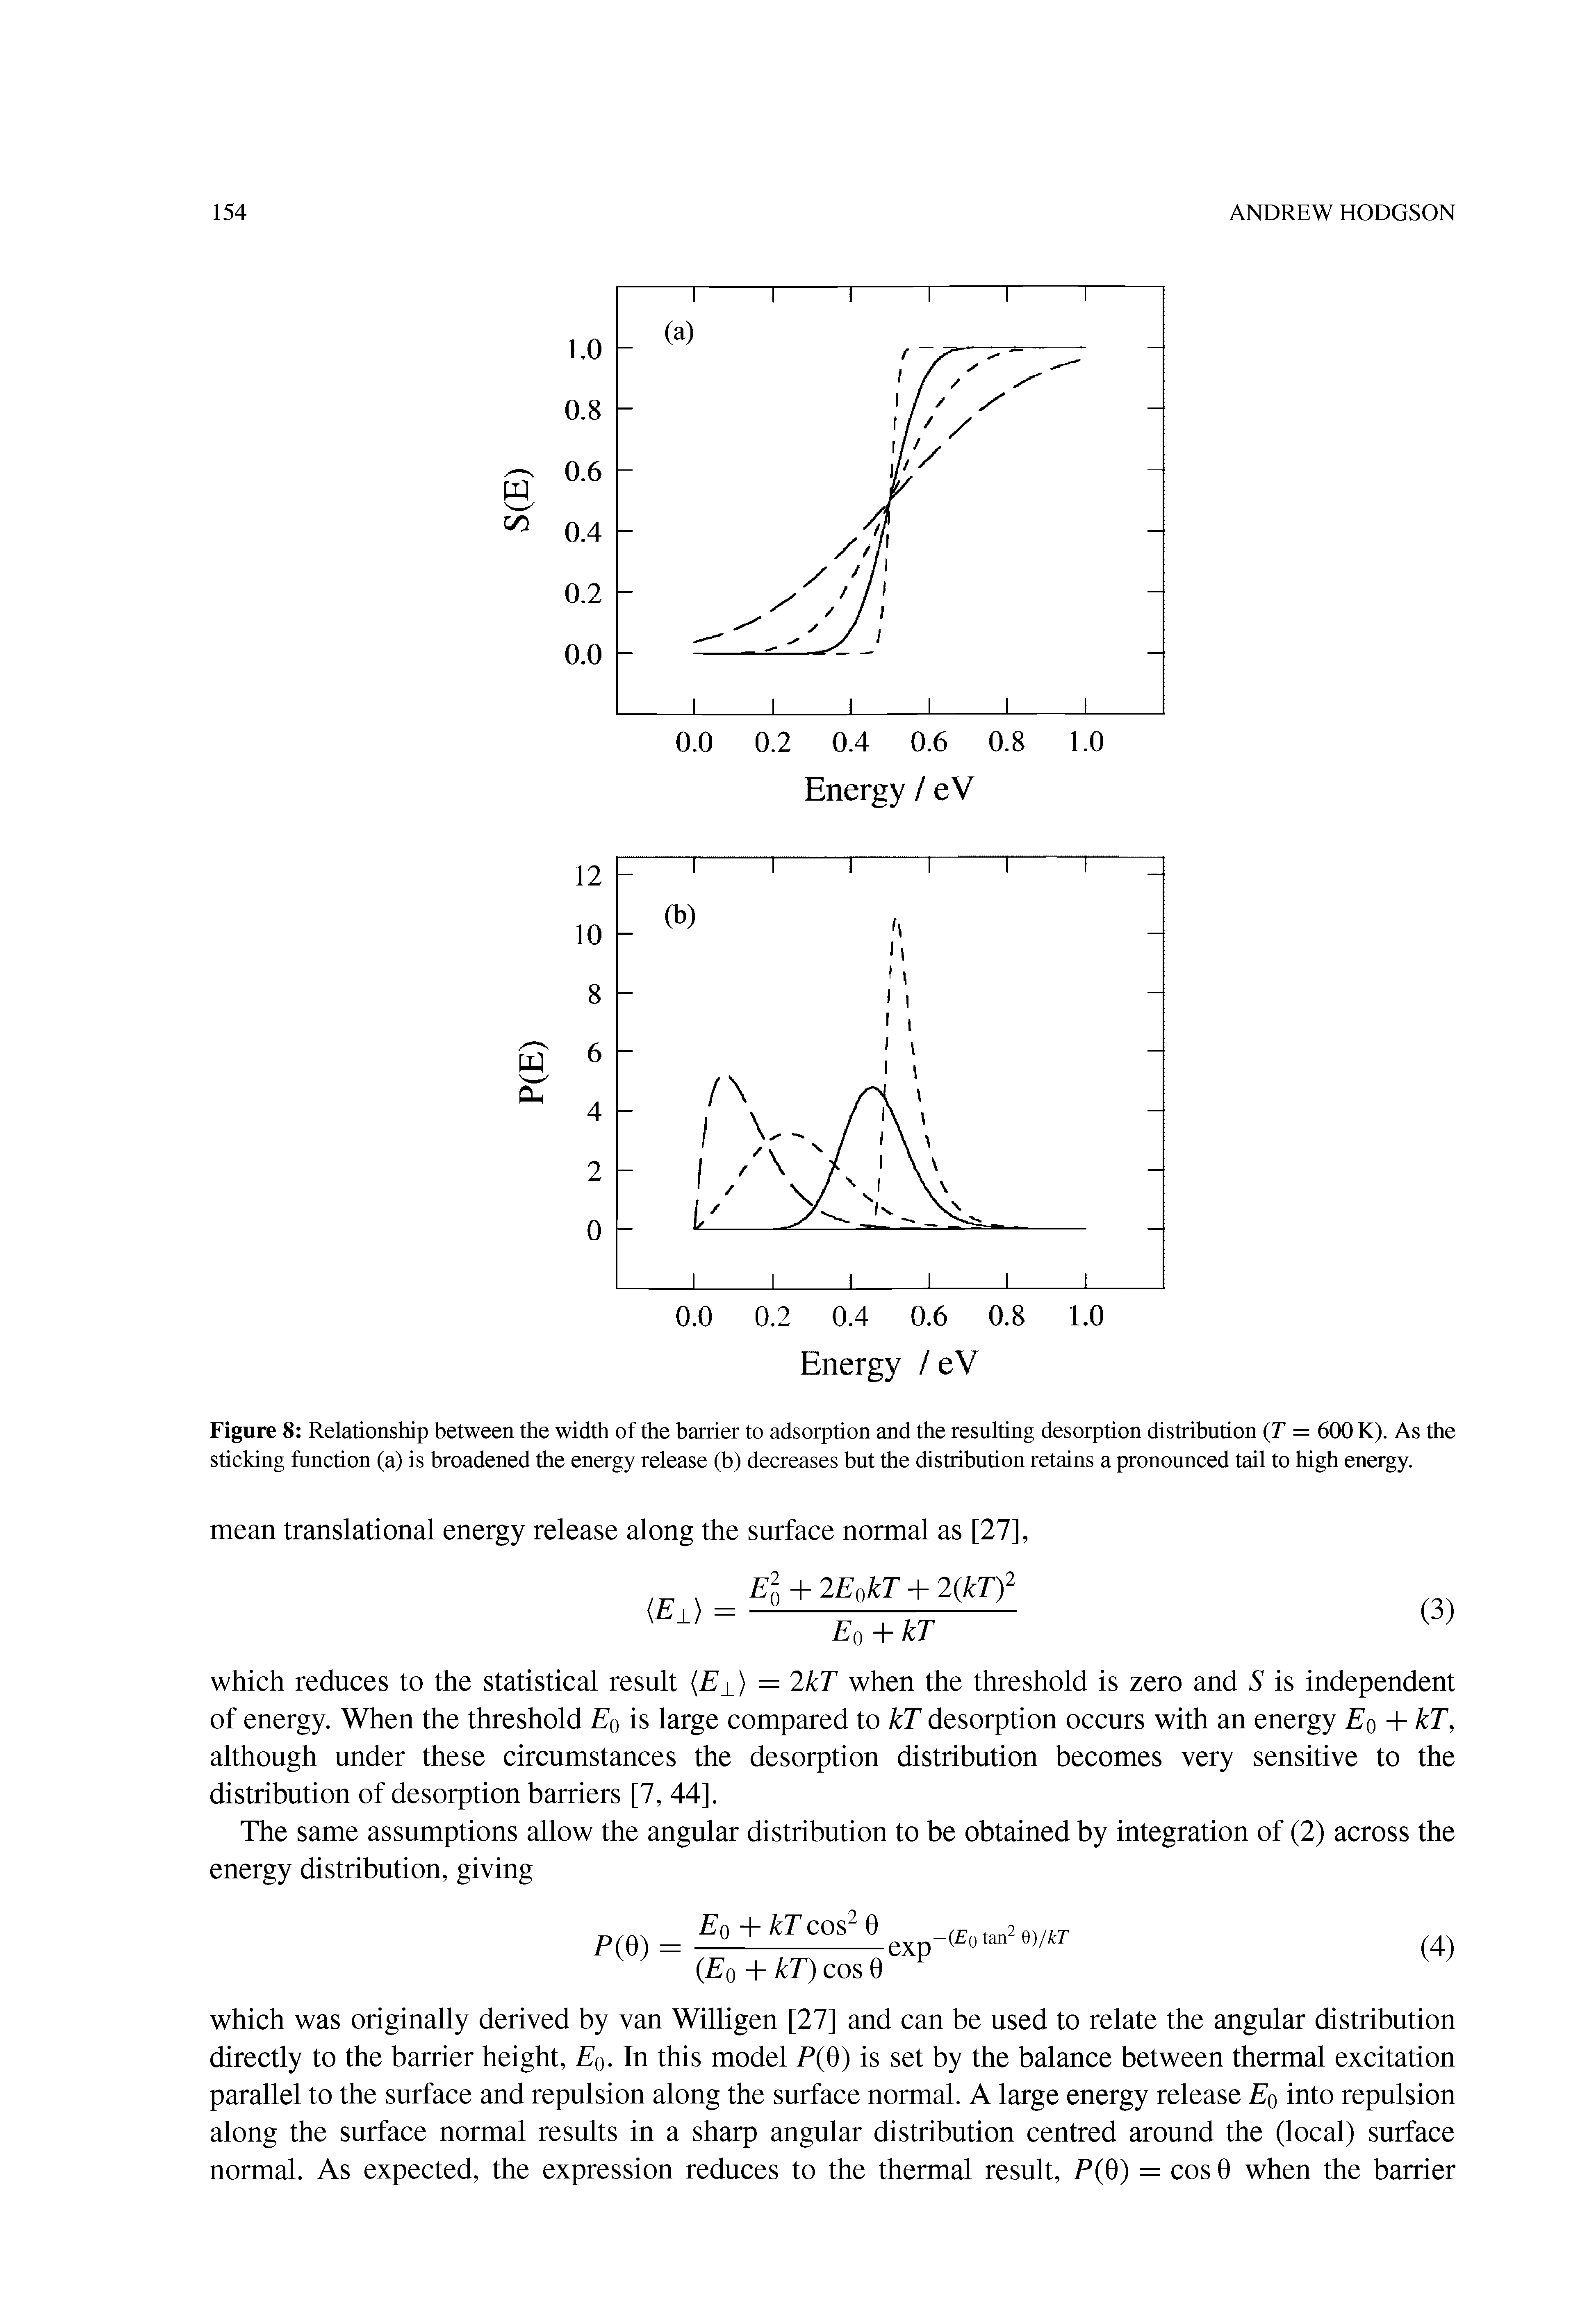 Figure 8 Relationship between the width of the barrier to adsorption and the resulting desorption distribution (T = 600 K). As the sticking function (a) is broadened the energy release (b) decreases but the distribution retains a pronounced tail to high energy.